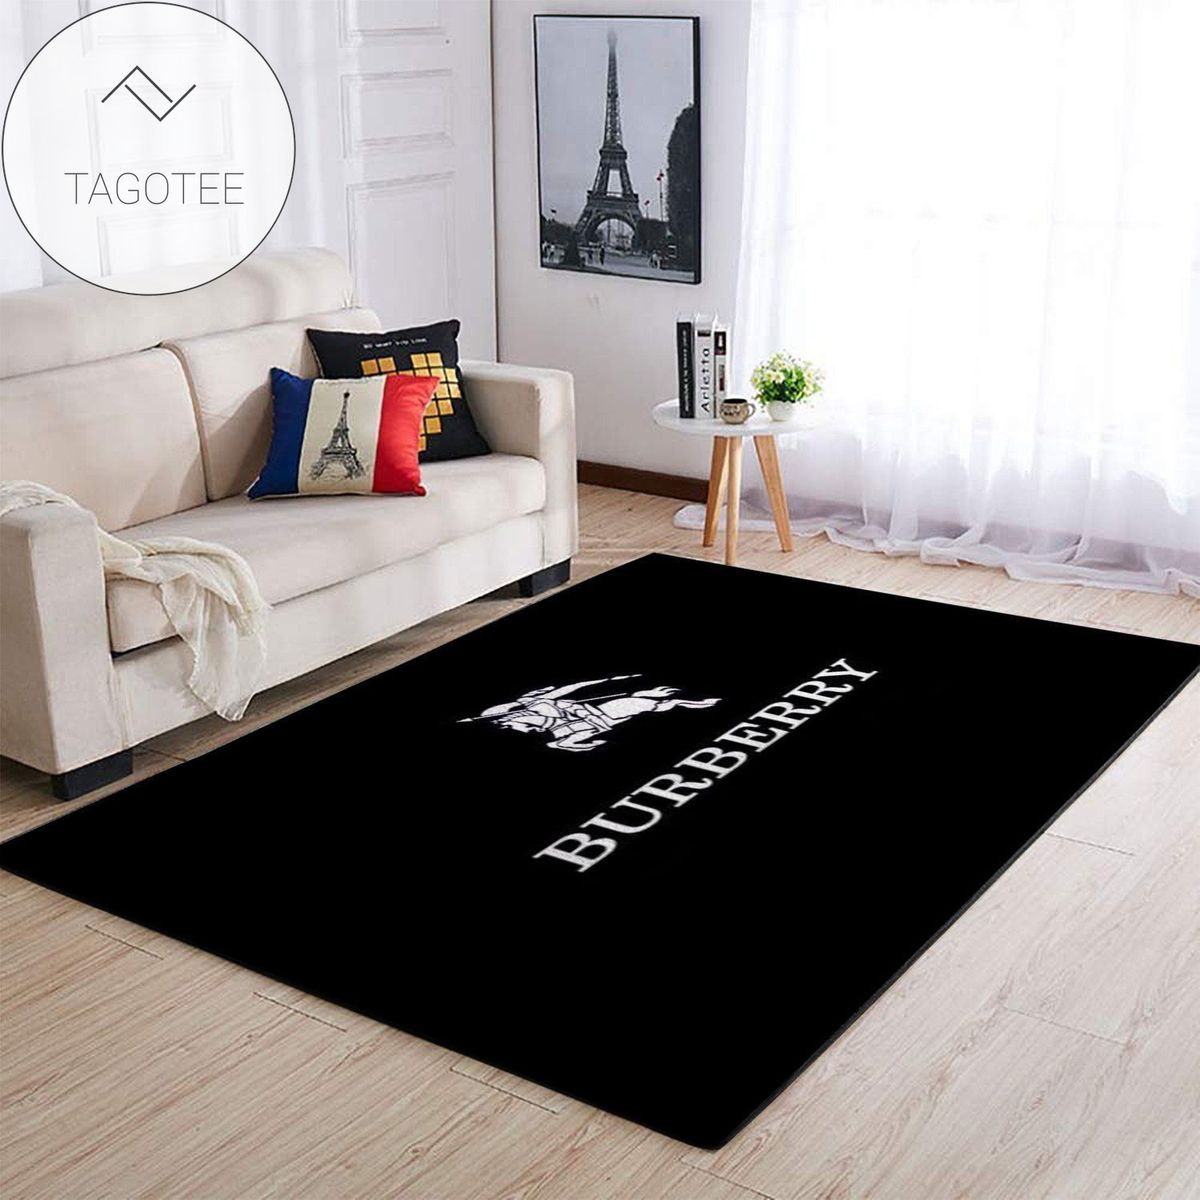 Burberry Luxury Brand 25 Area Rug Carpet Living Room And Bedroom Mat